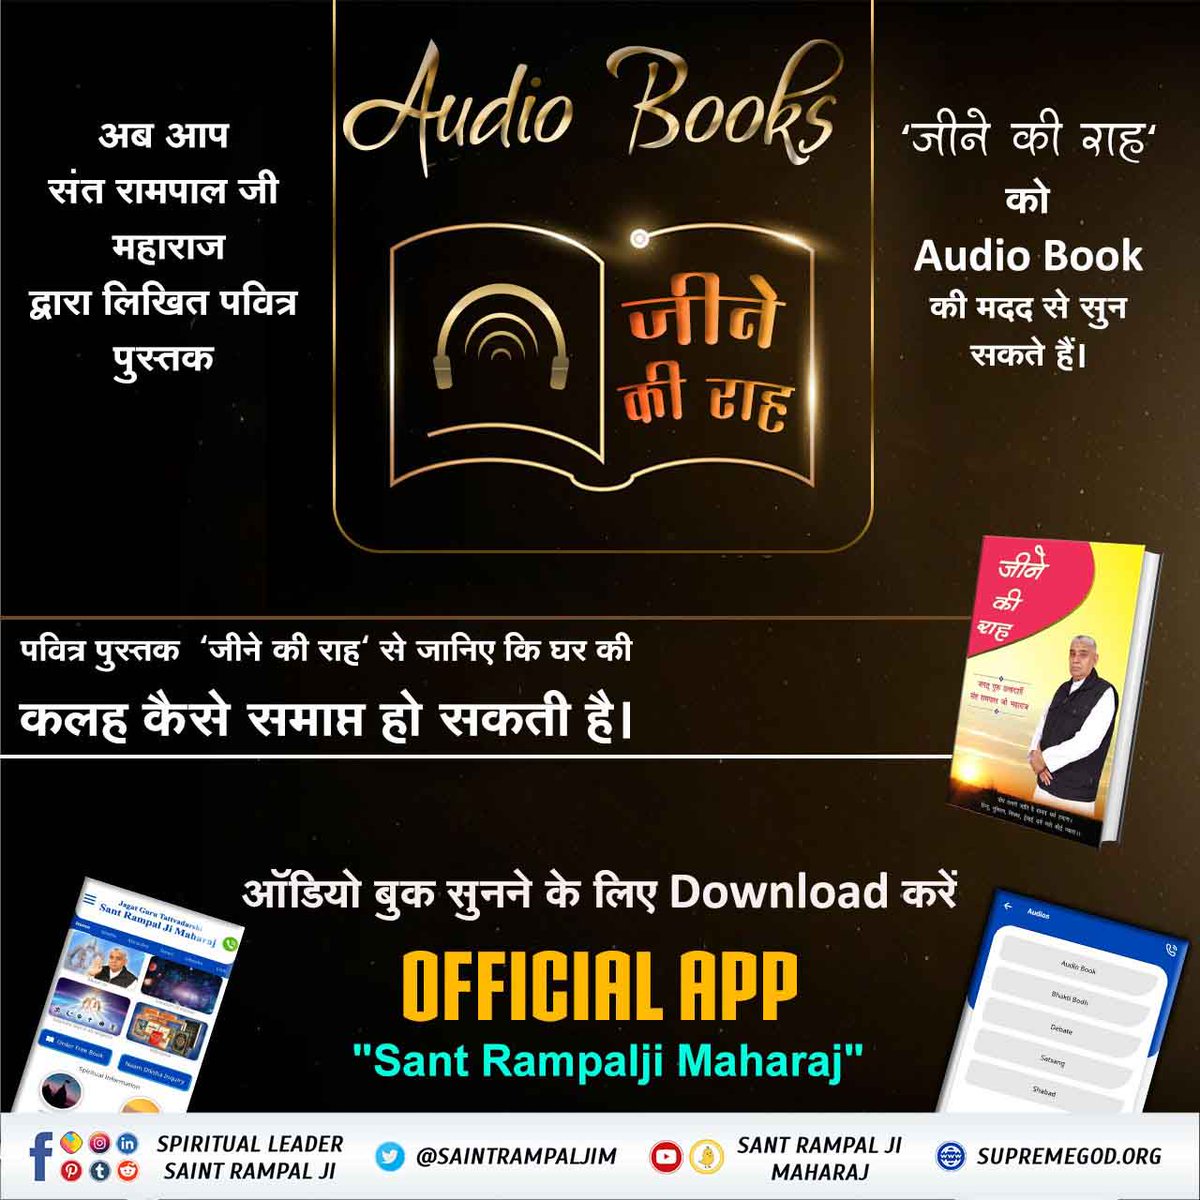 #AudioBook_JeeneKiRah Learn from the holy book 'Jeene Ki Raah' how domestic discord can be ended. Download the official app 'SANT RAMPAL JI MAHARAJ' to listen to the audio book #GodMorningSunday